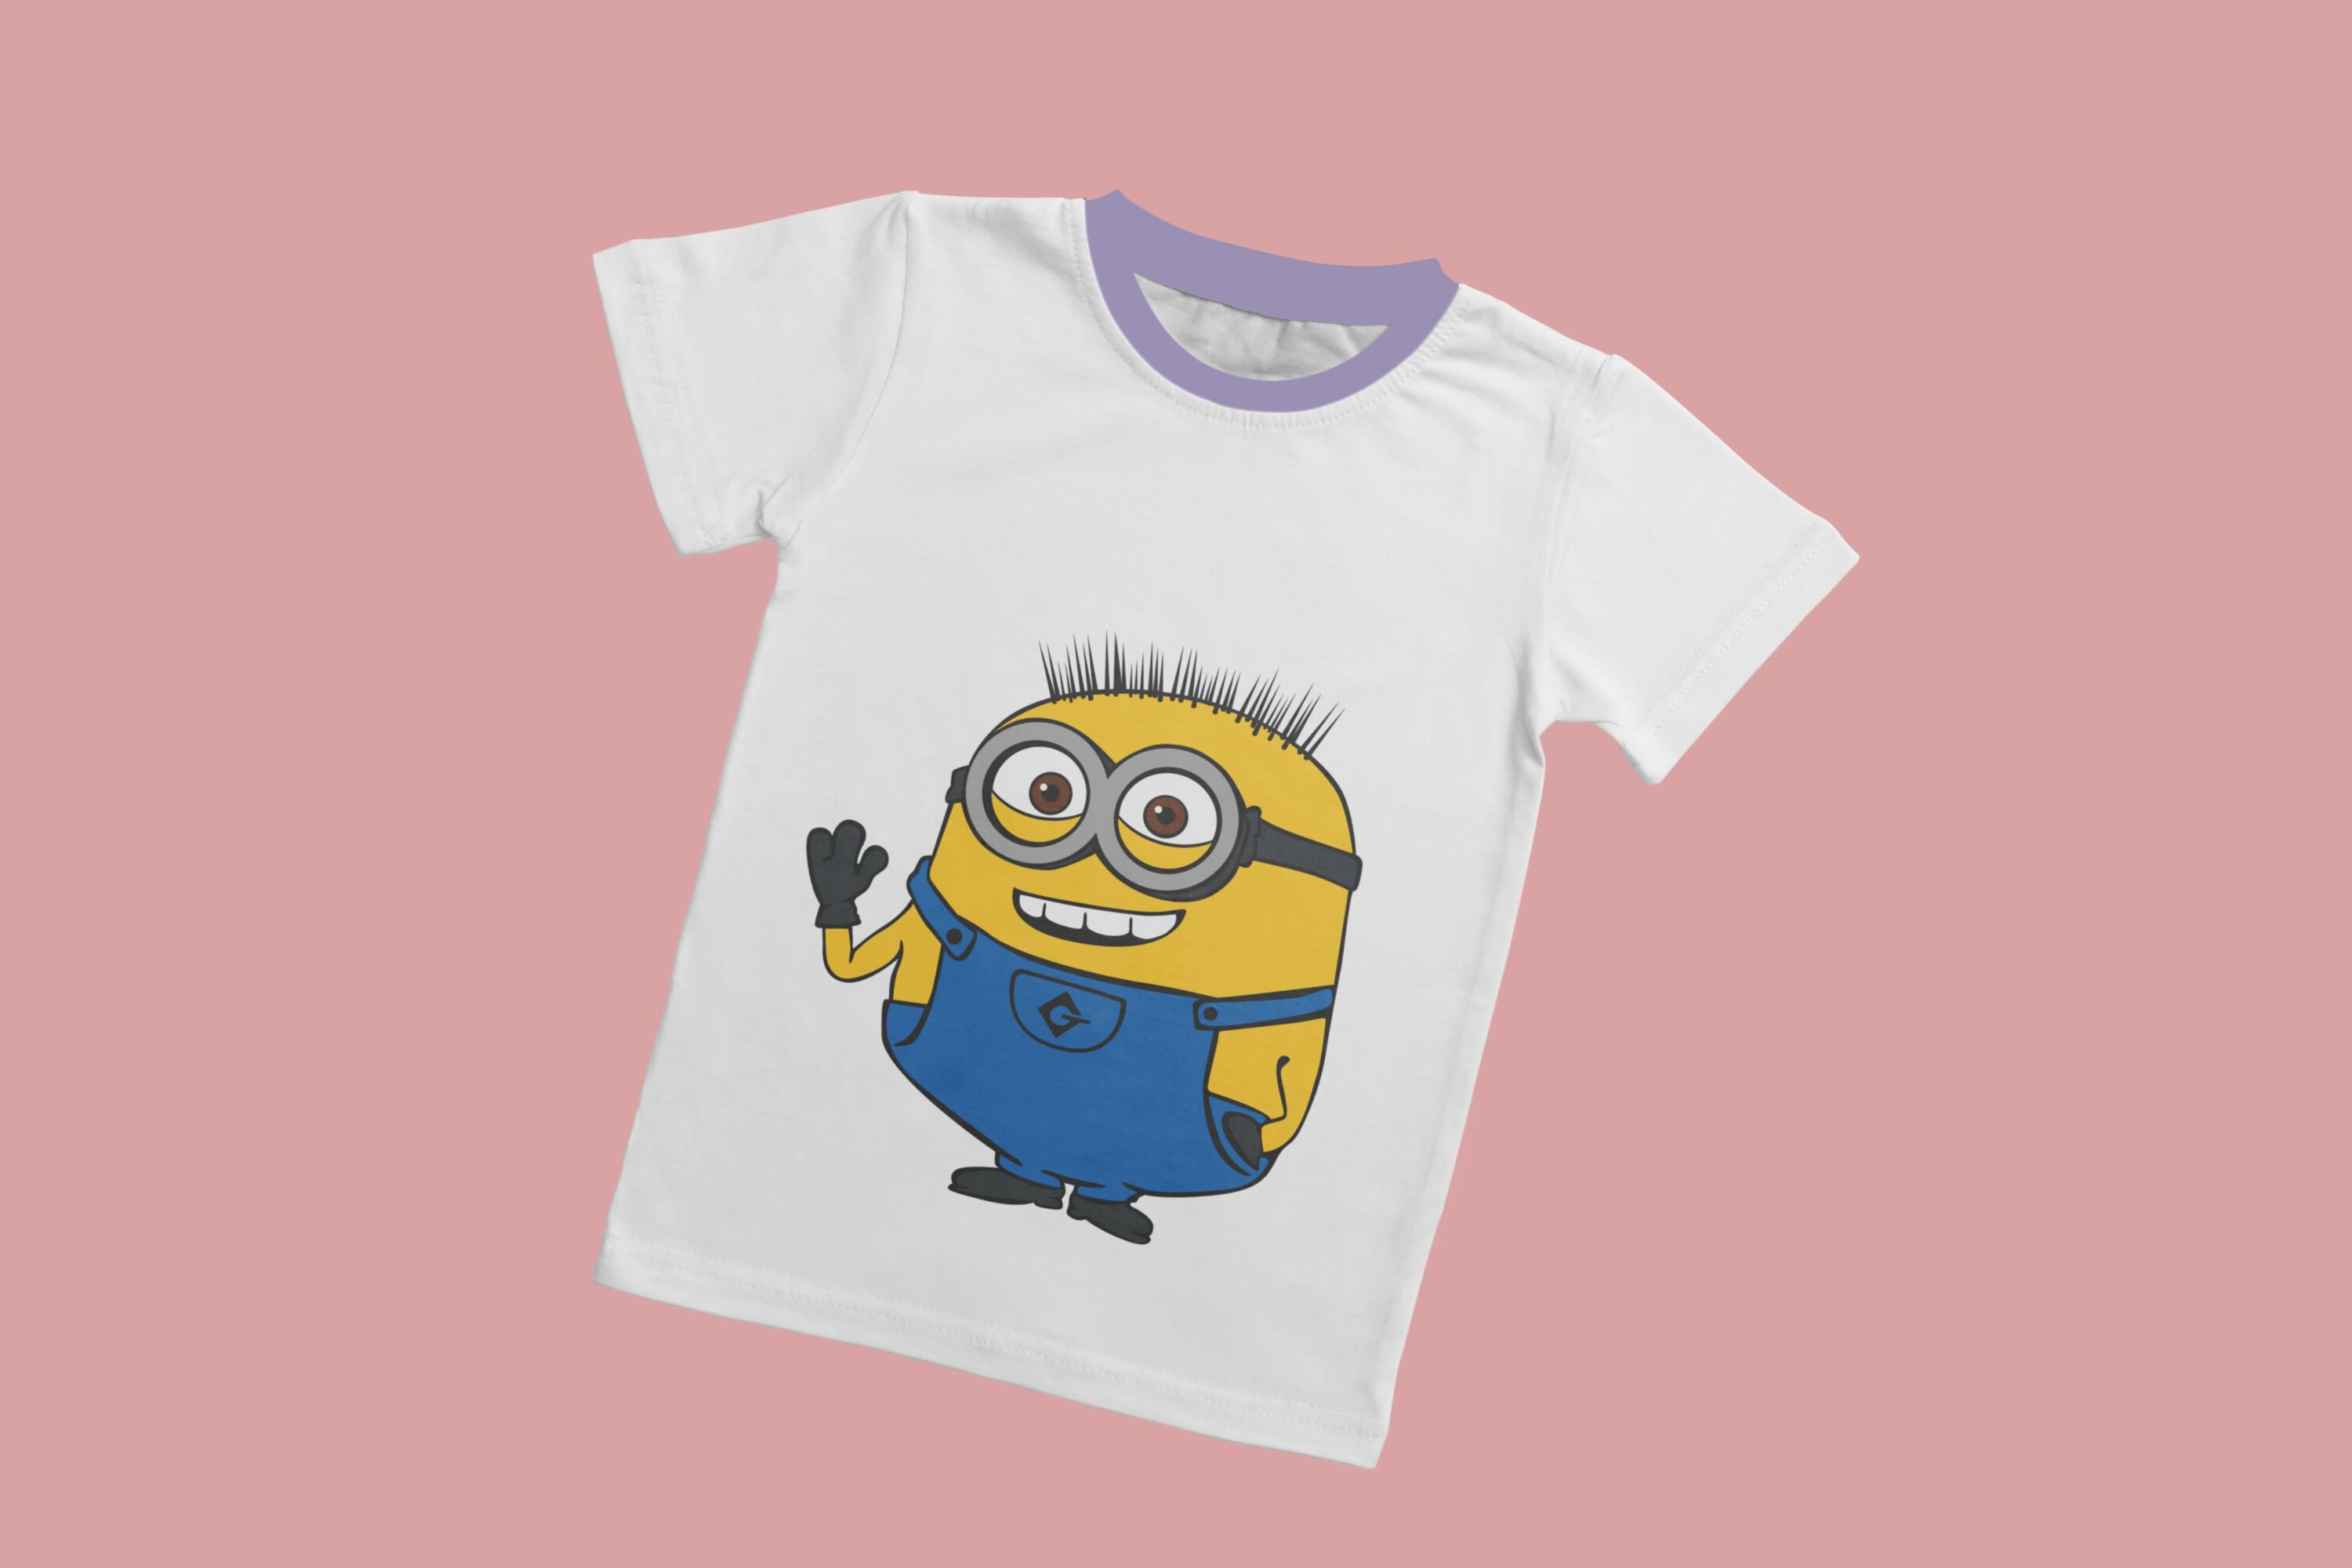 A white T-shirt with a lavender collar and a smiling little minion.